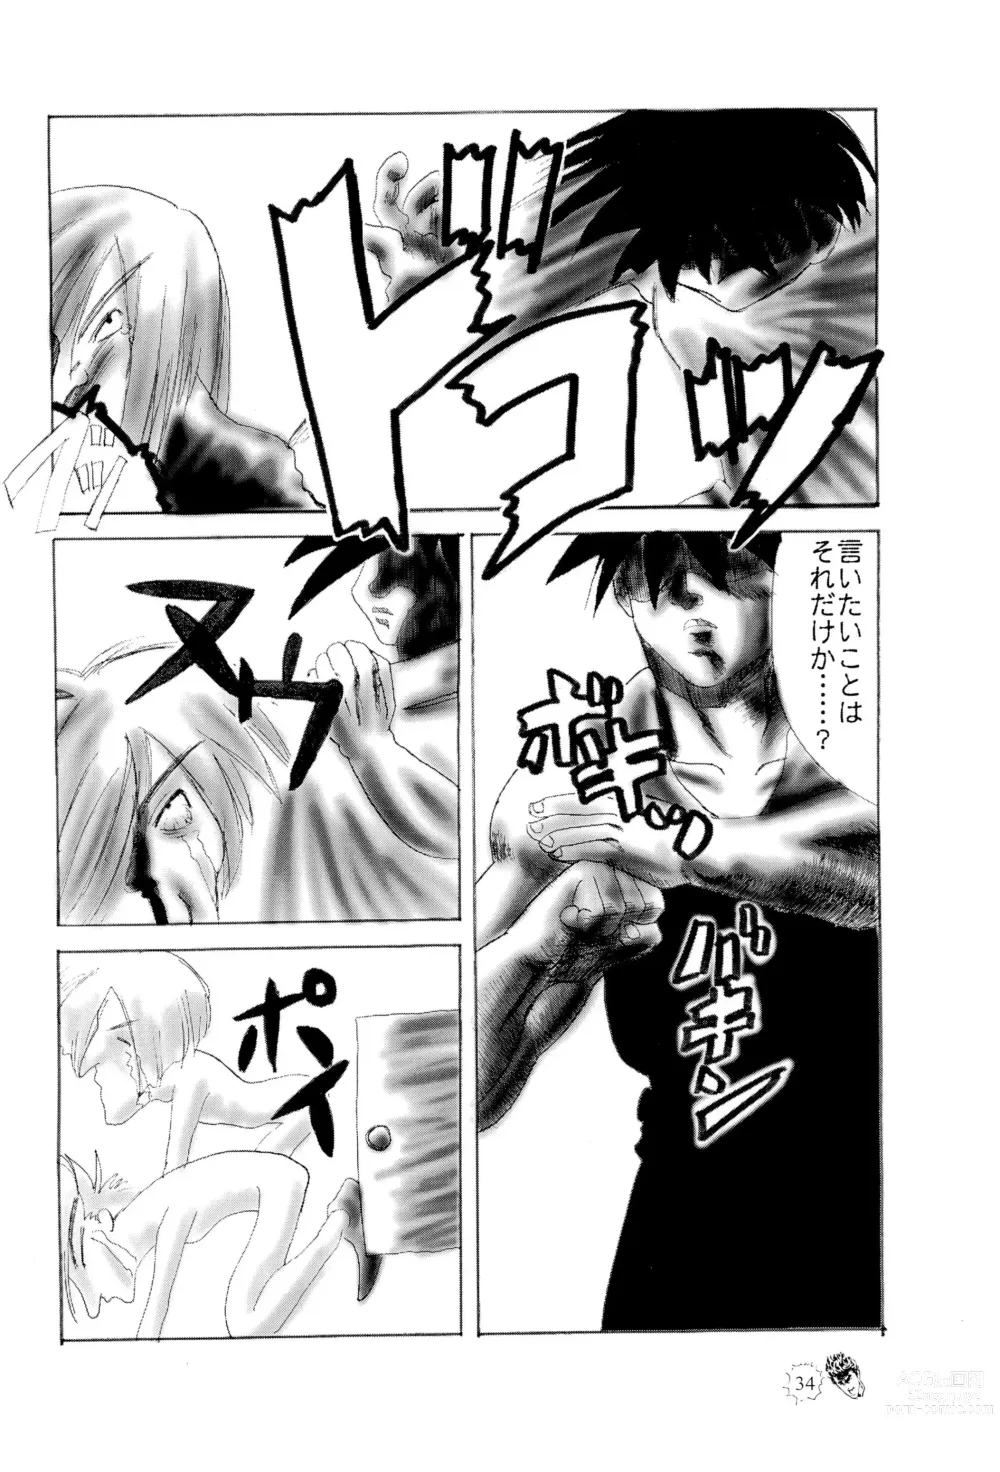 Page 34 of doujinshi CHIBICKERS 4